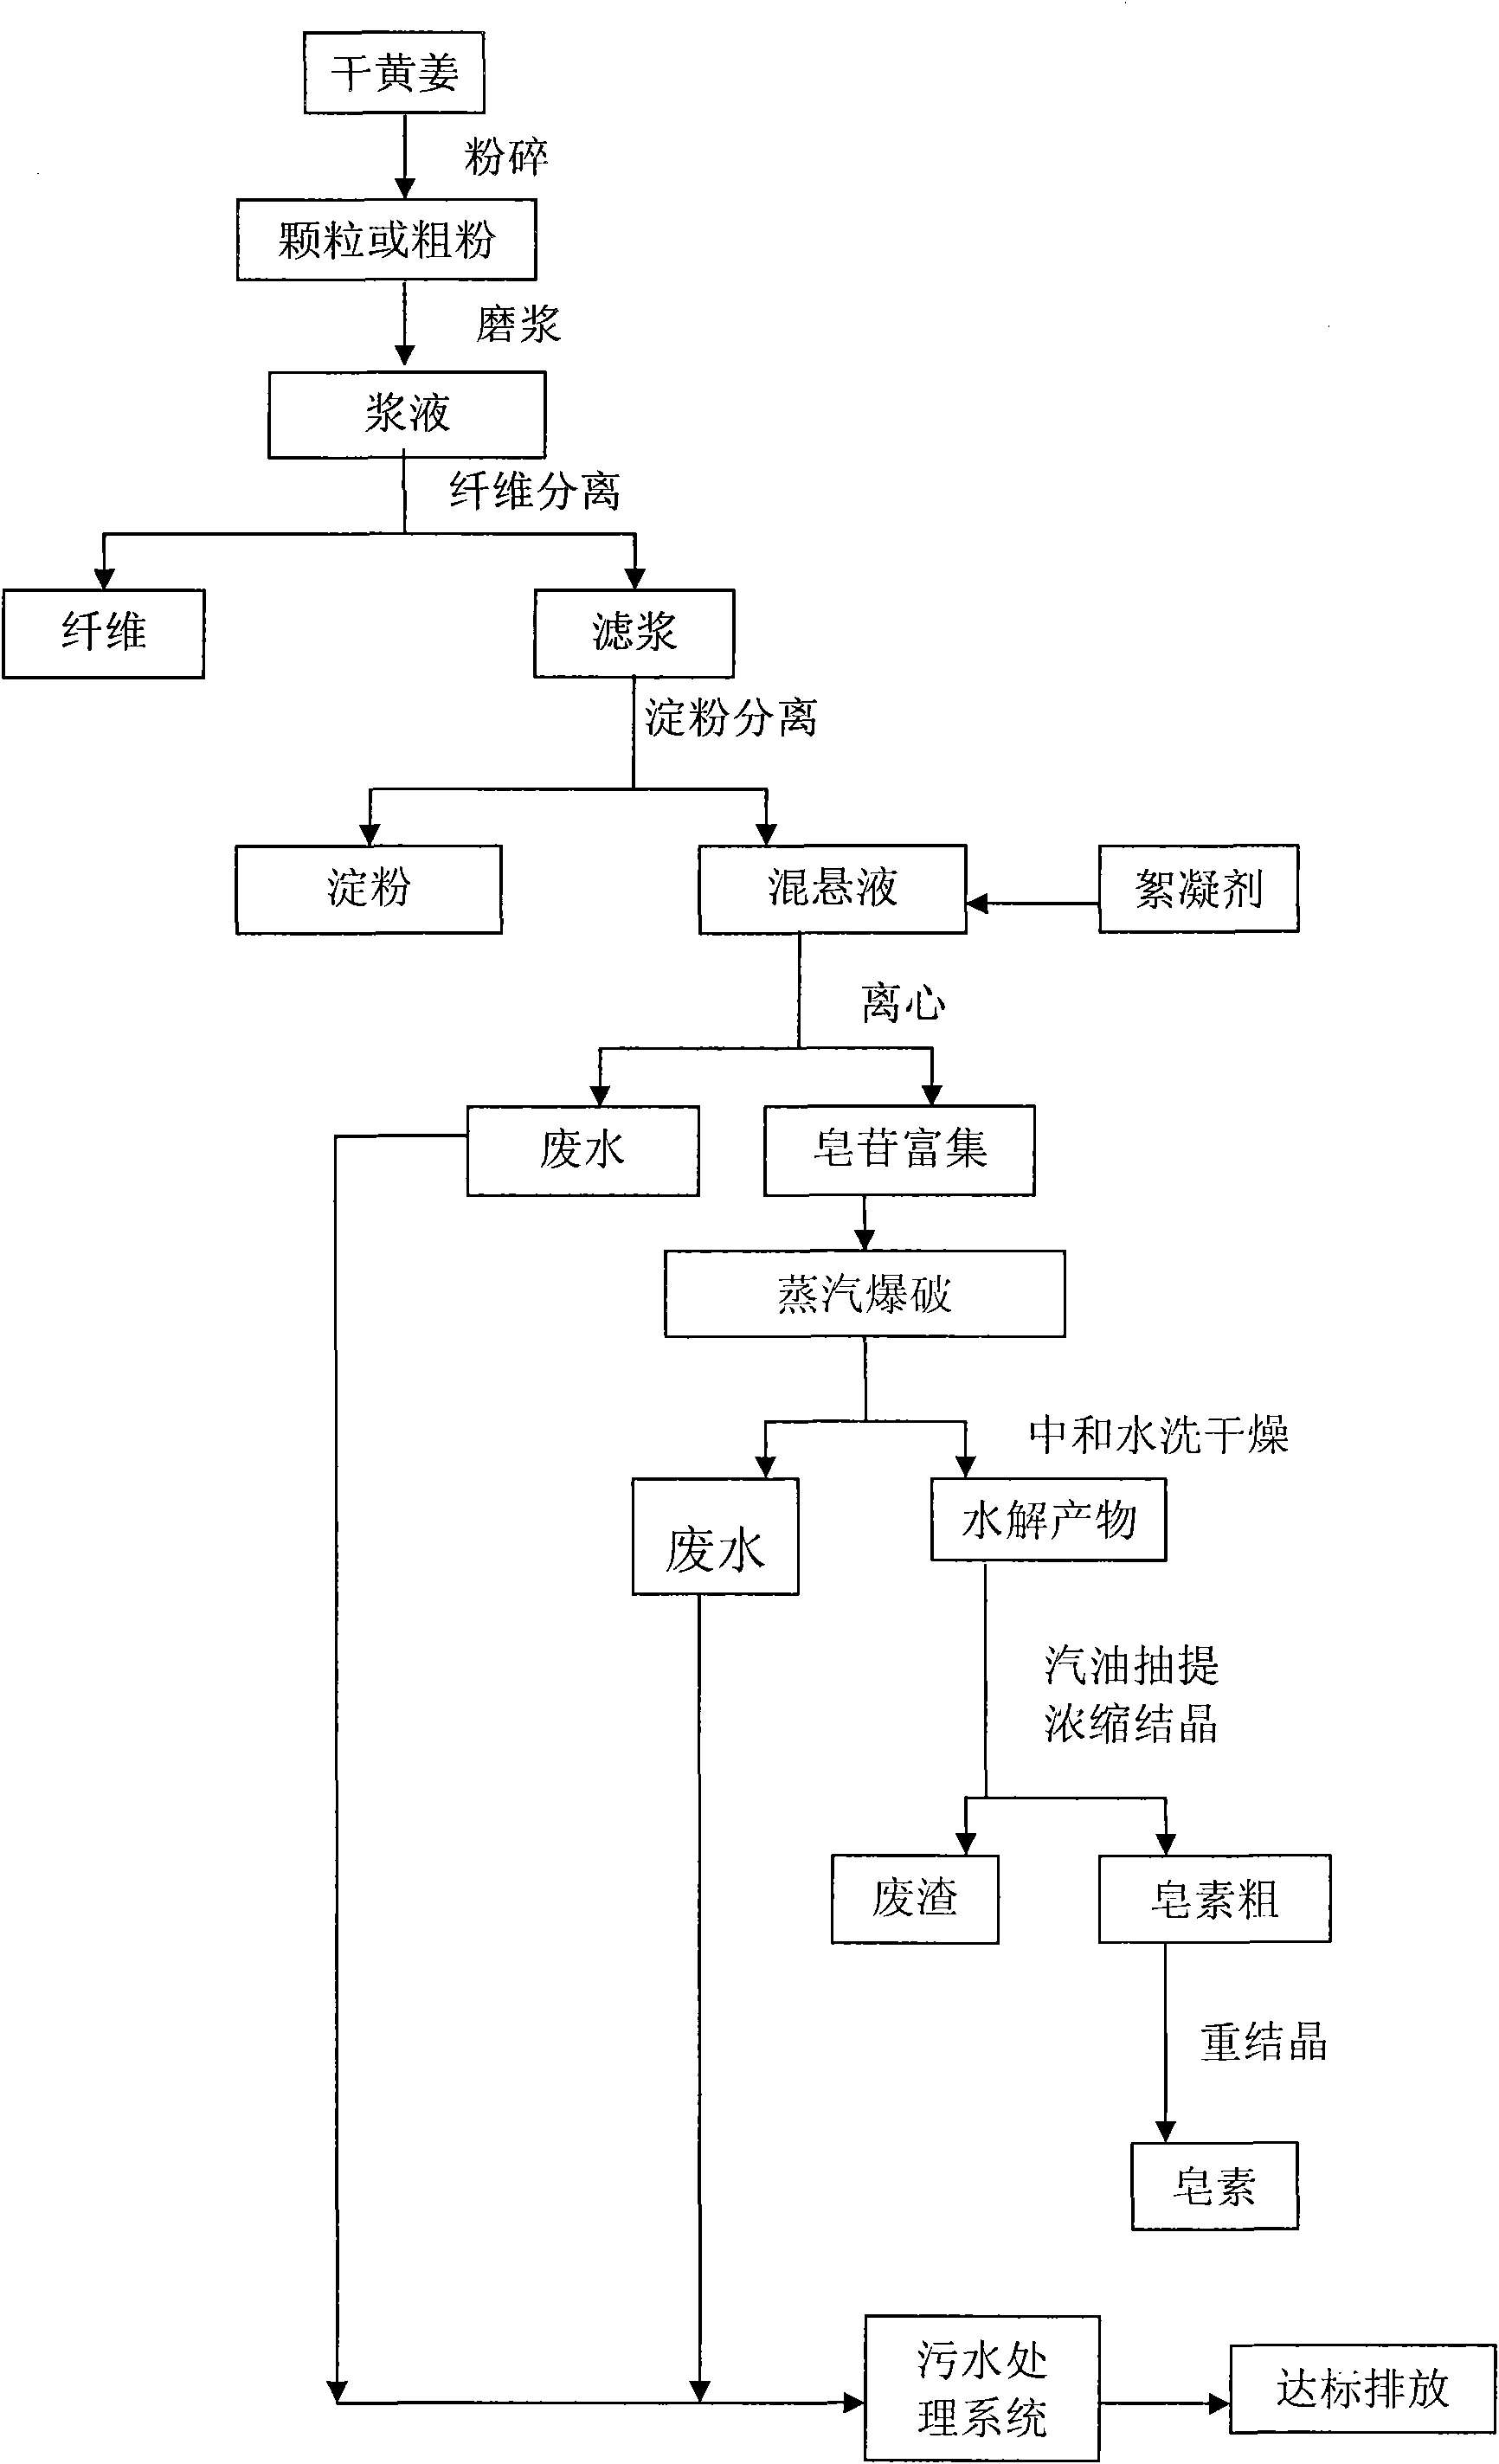 Method for extraction of diosgenin via steam explosion